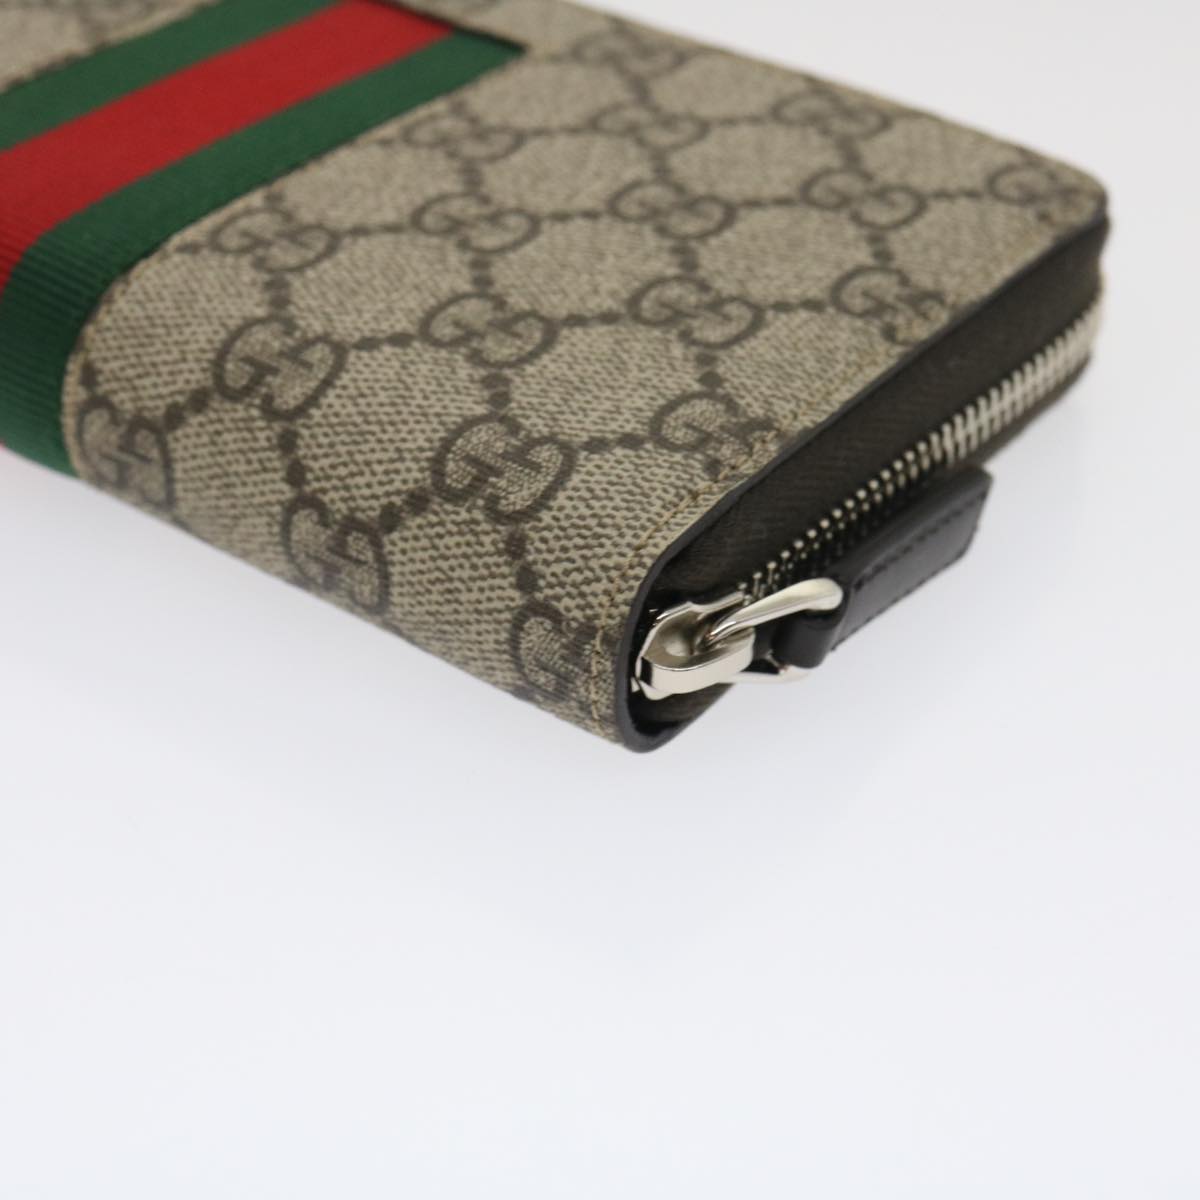 GUCCI Web Sherry Line GG Canvas Supreme Long Wallet Beige Red Green Auth jk1450A